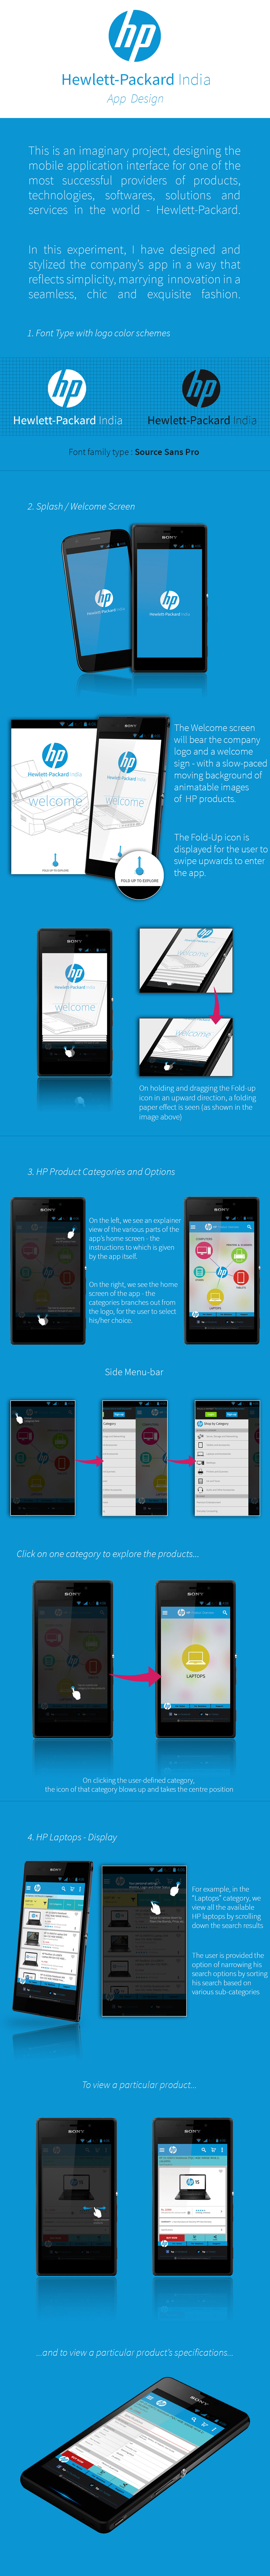 hp Interface redesign app design app android iphone